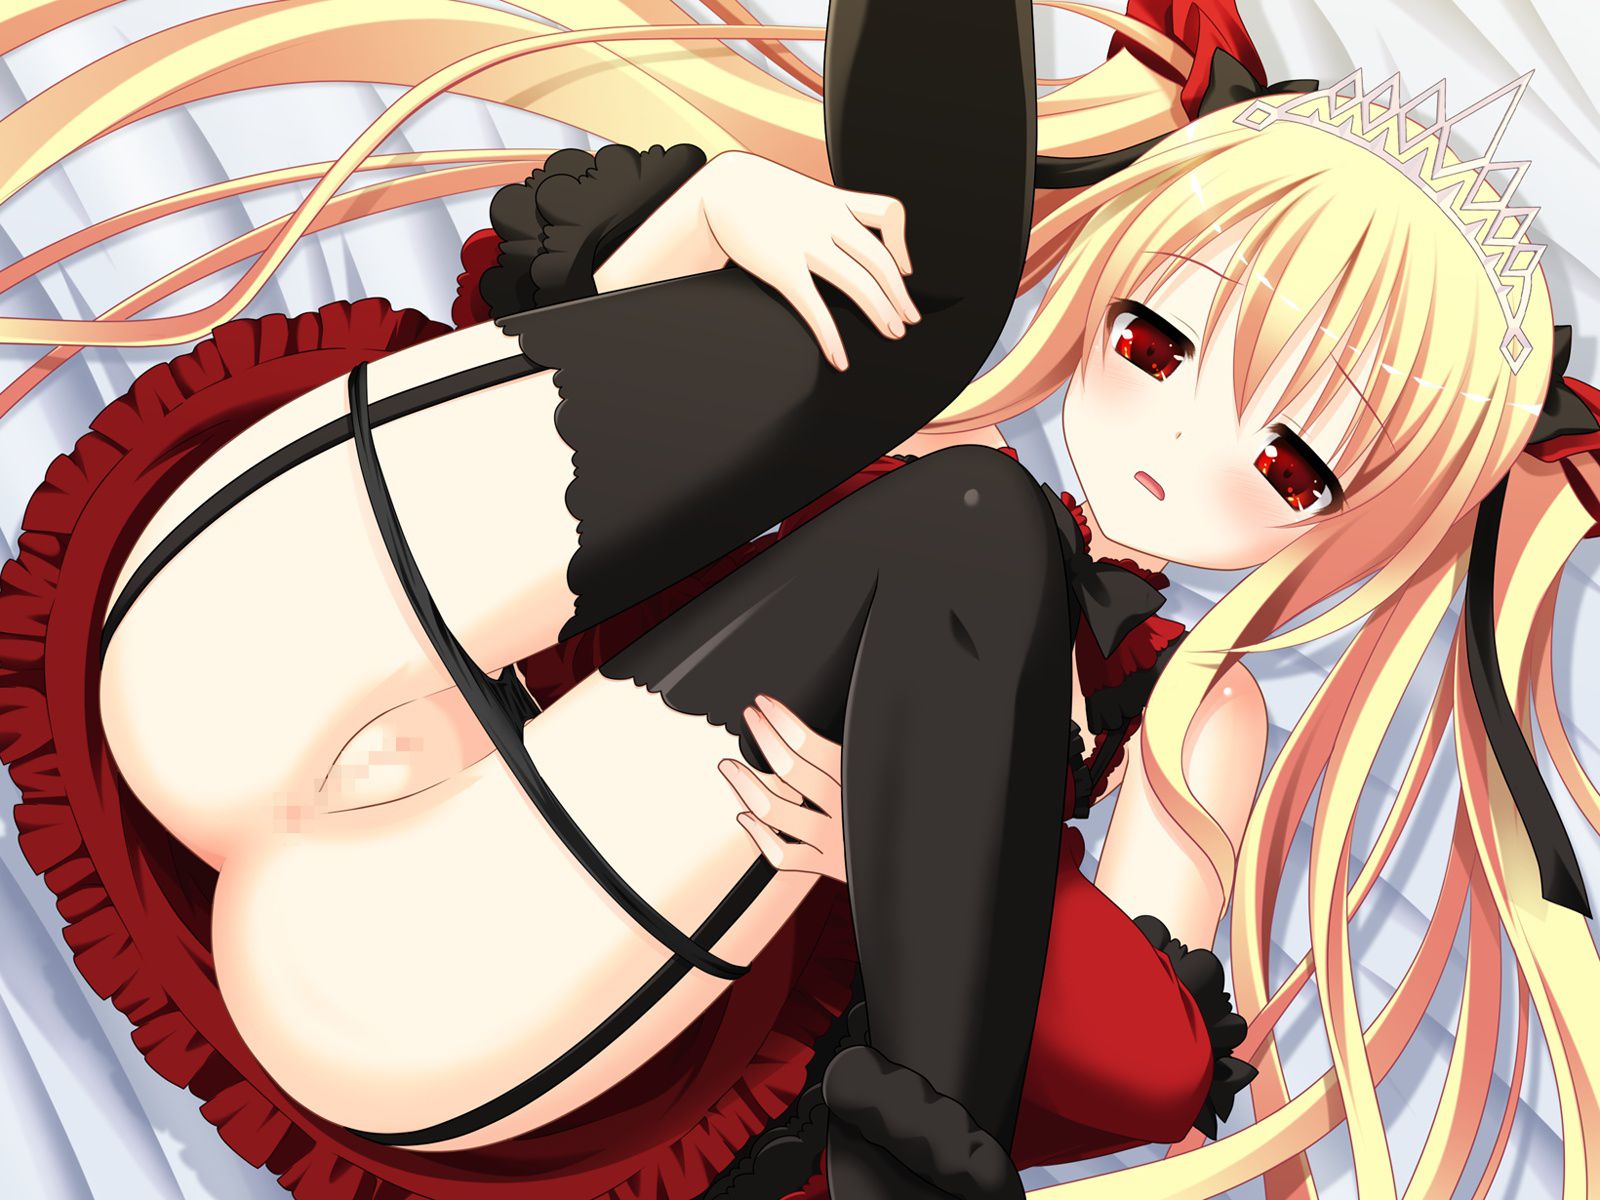 BLOODY † RONDO (Rondo bloody) [under age 18 prohibited eroge HCG] wallpapers and pictures part 2 4